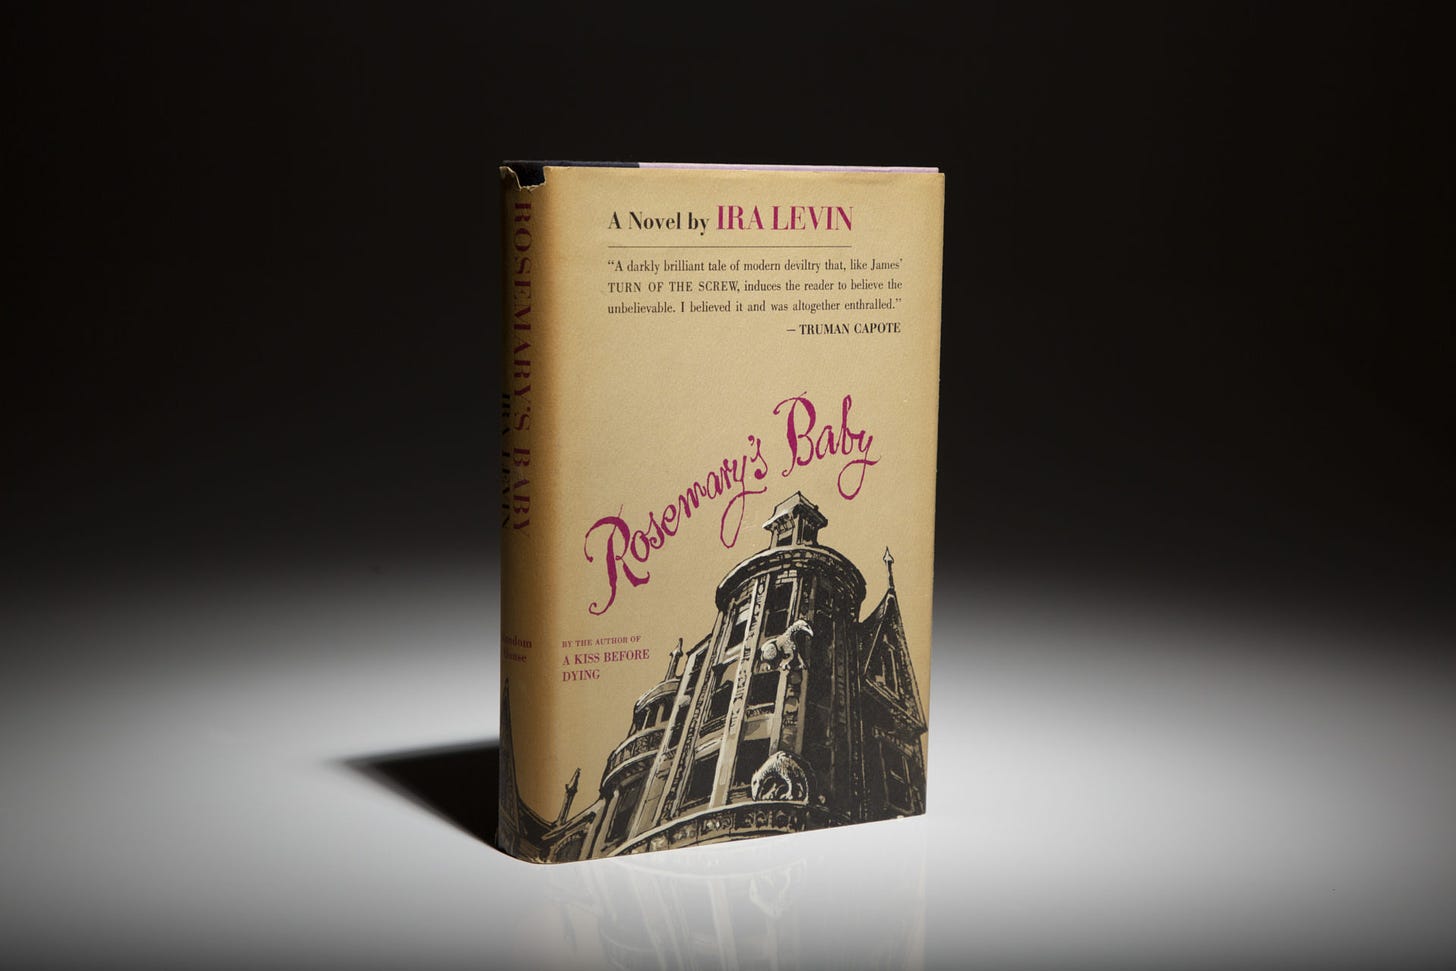 Photograph of the first edition of Rosemary's Baby, hardcover, featuring an illustration of an old Gothic building with the book's title hovering over it in handwritten cursive font